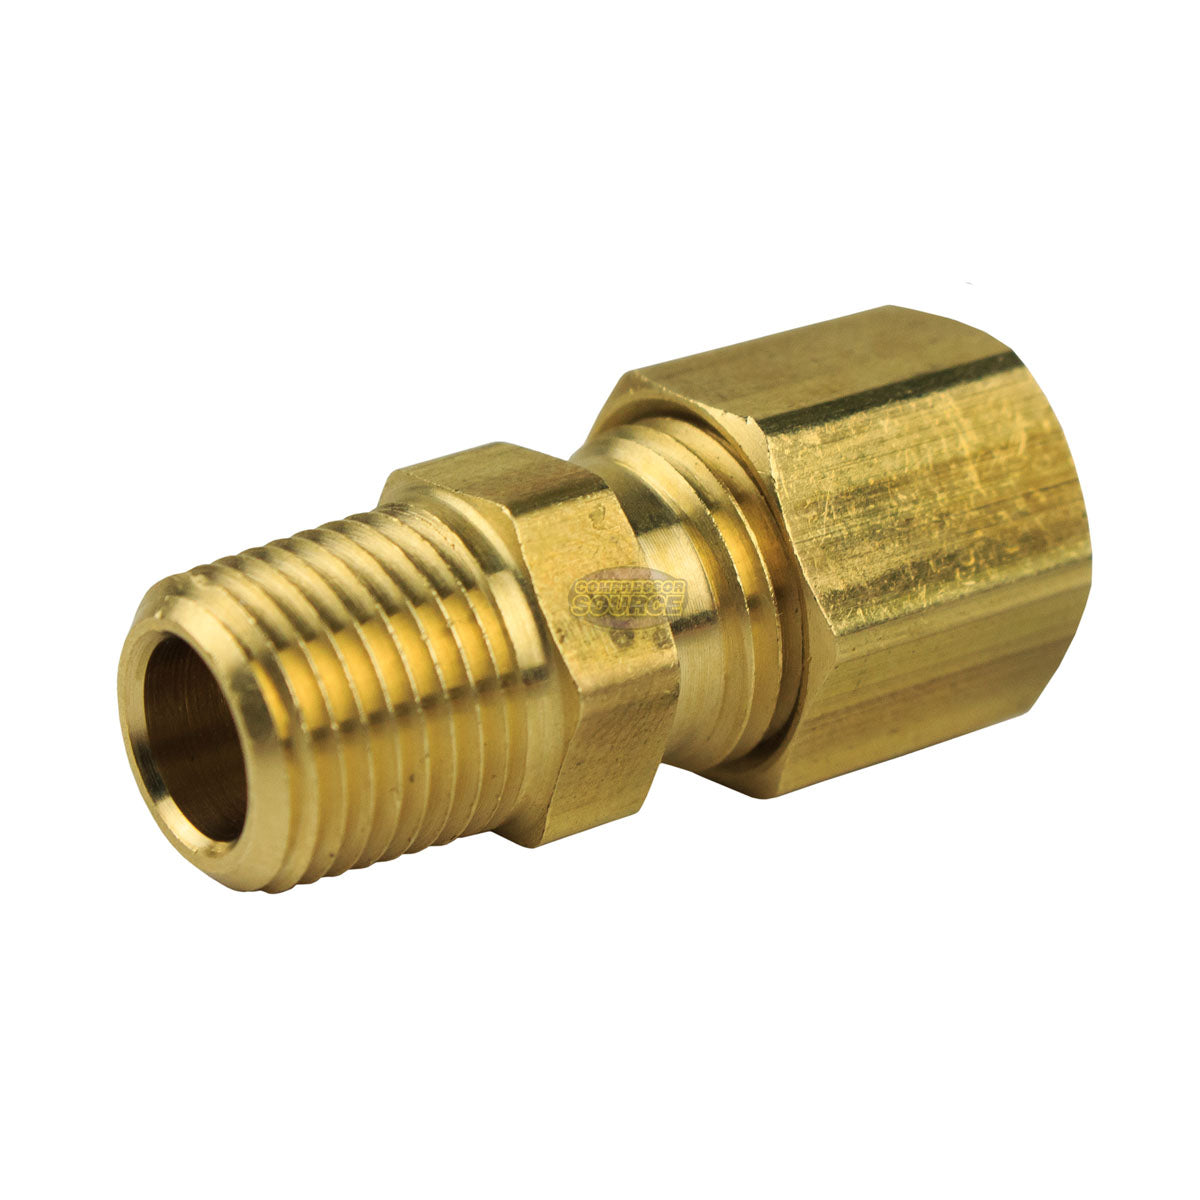 Threading Adapter, NPT 1/8 Male to G 1/4 Female